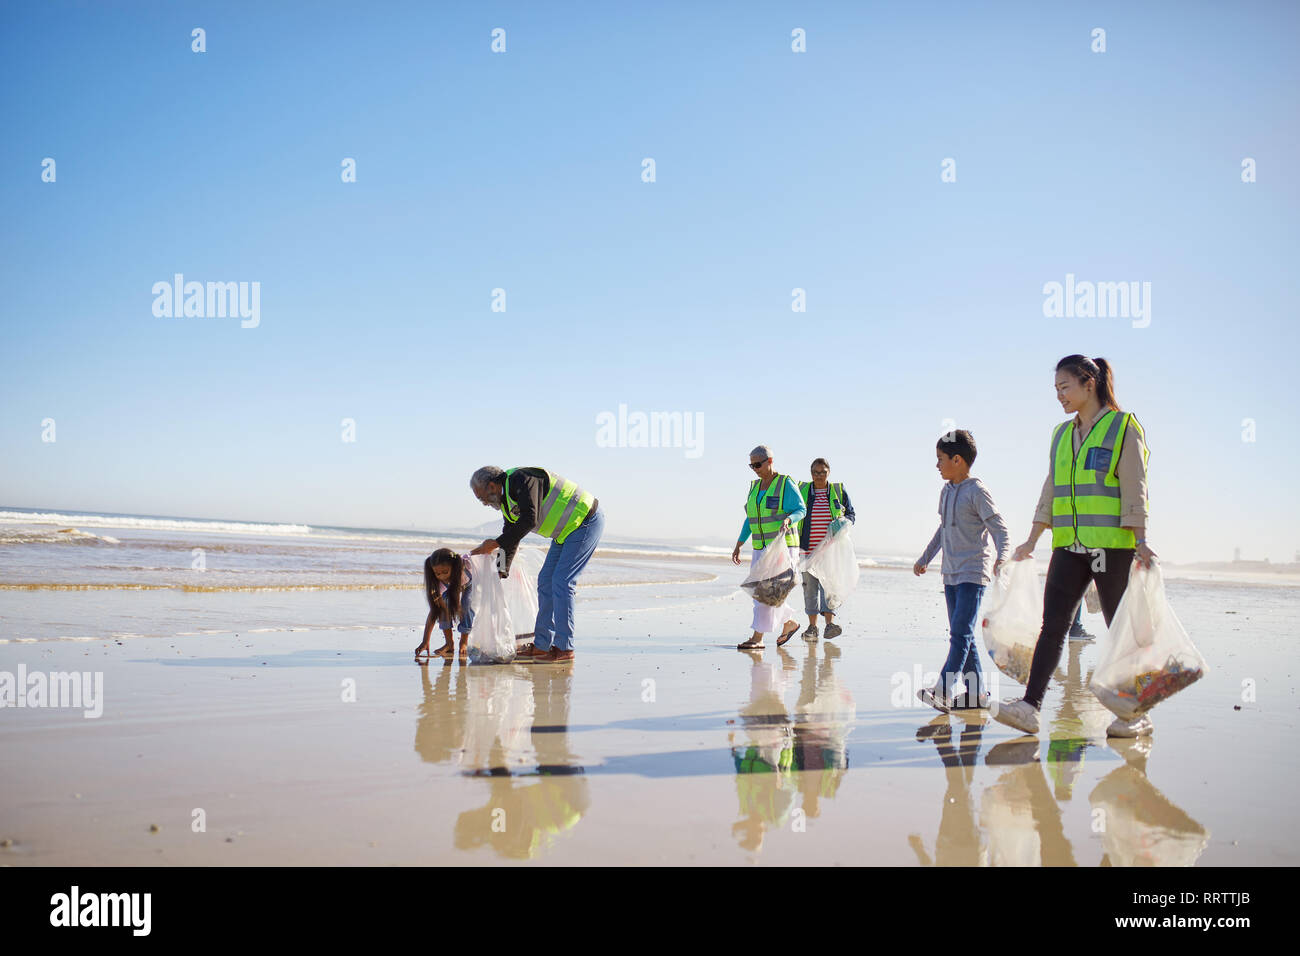 Volunteers cleaning litter from wet sand beach Stock Photo